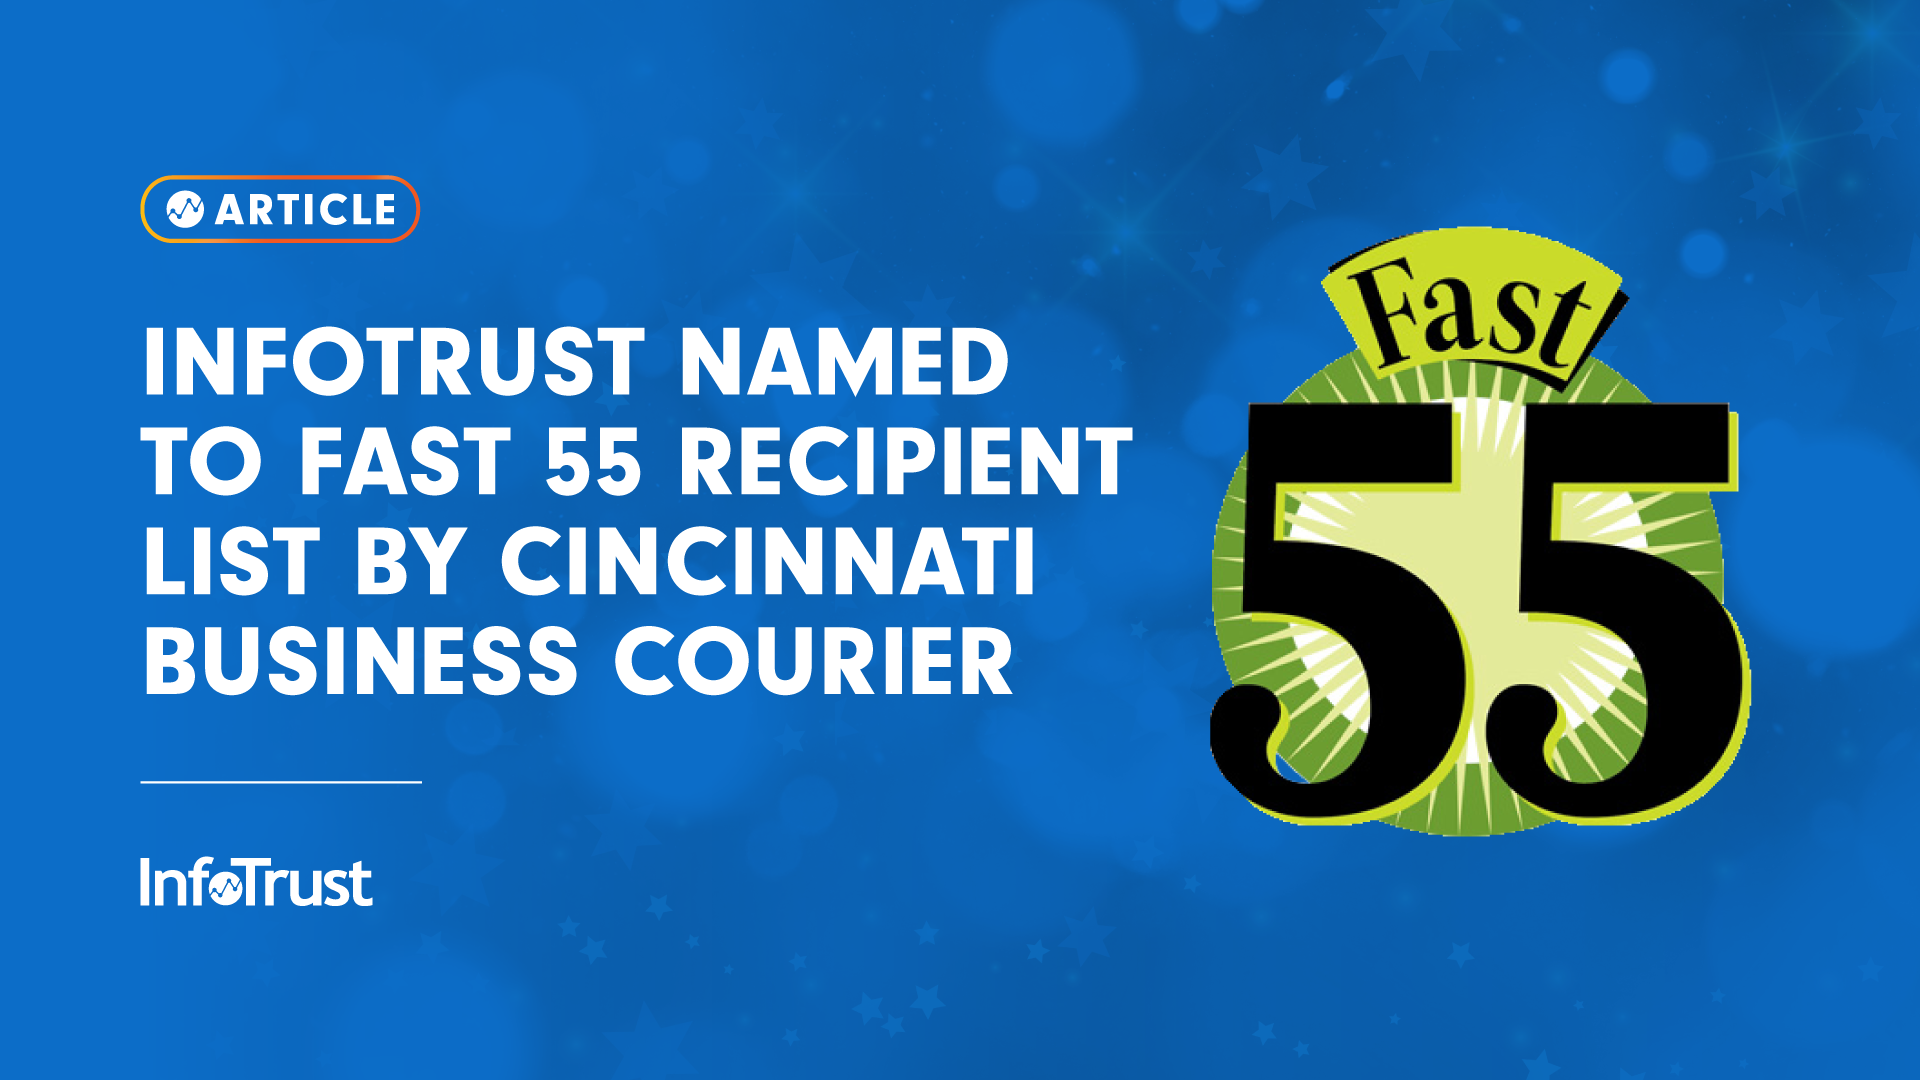 InfoTrust Named to Fast 55 Recipient List by Cincinnati Business Courier